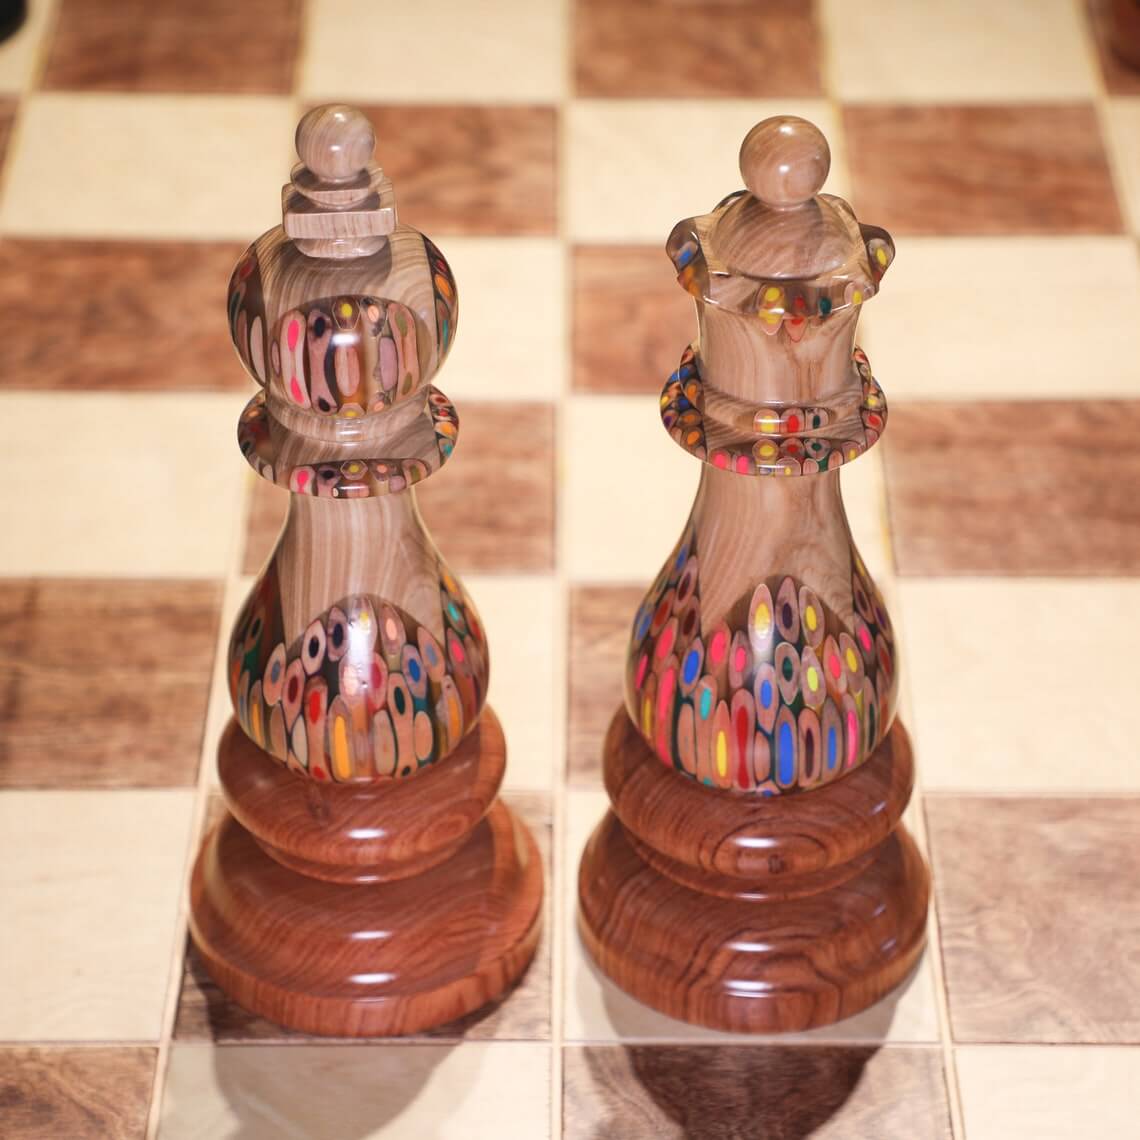 Giant Ornamental Rook - Deluxe Serial of Chess Piece for Decor